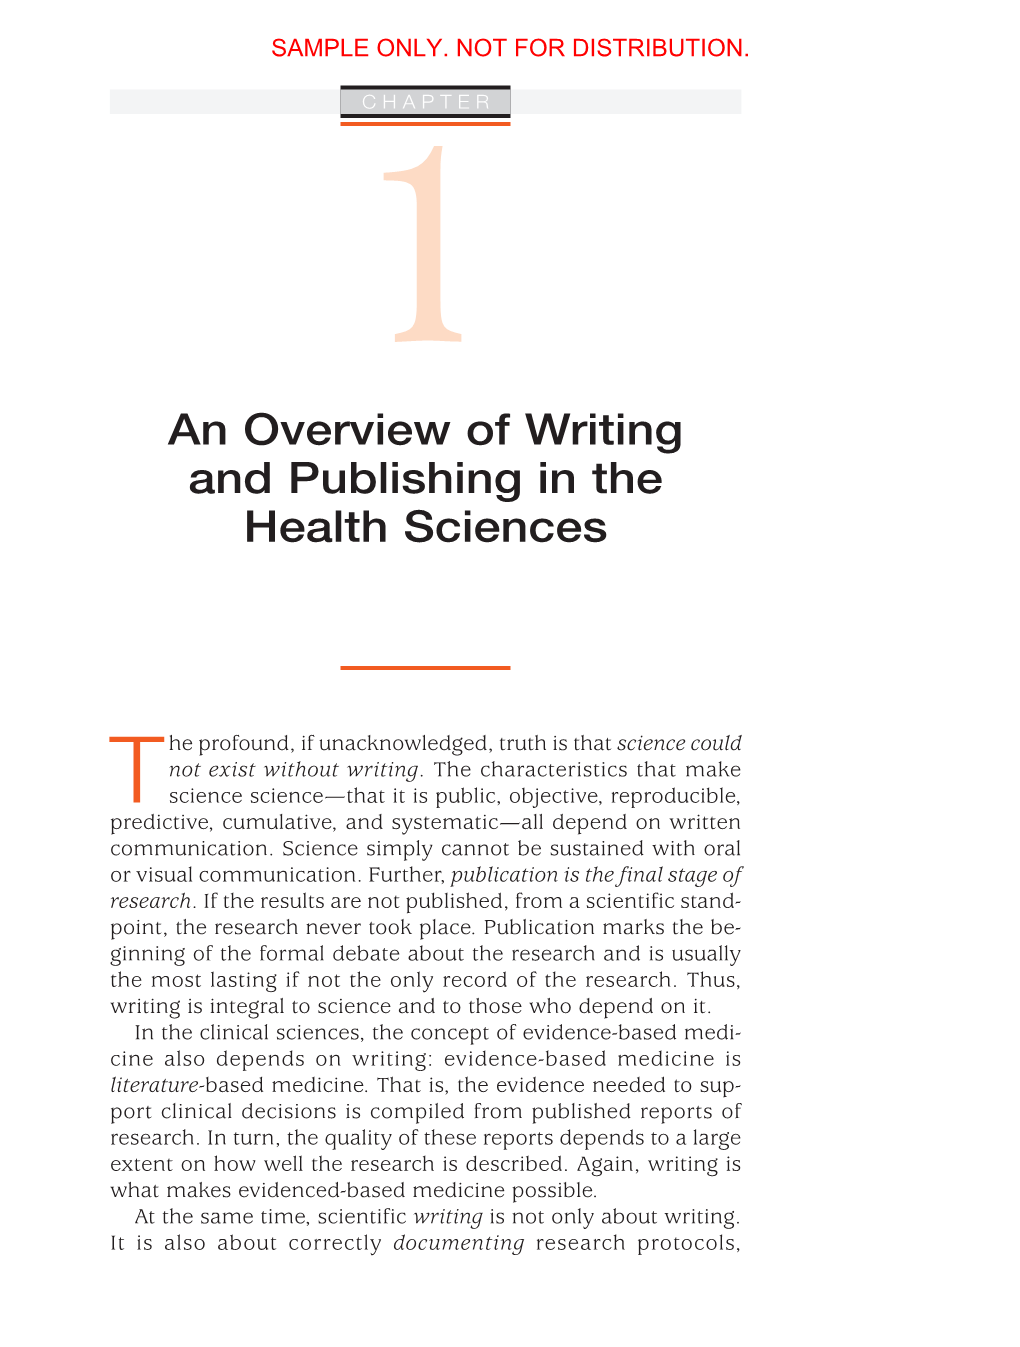 An Overview of Writing and Publishing in the Health Sciences